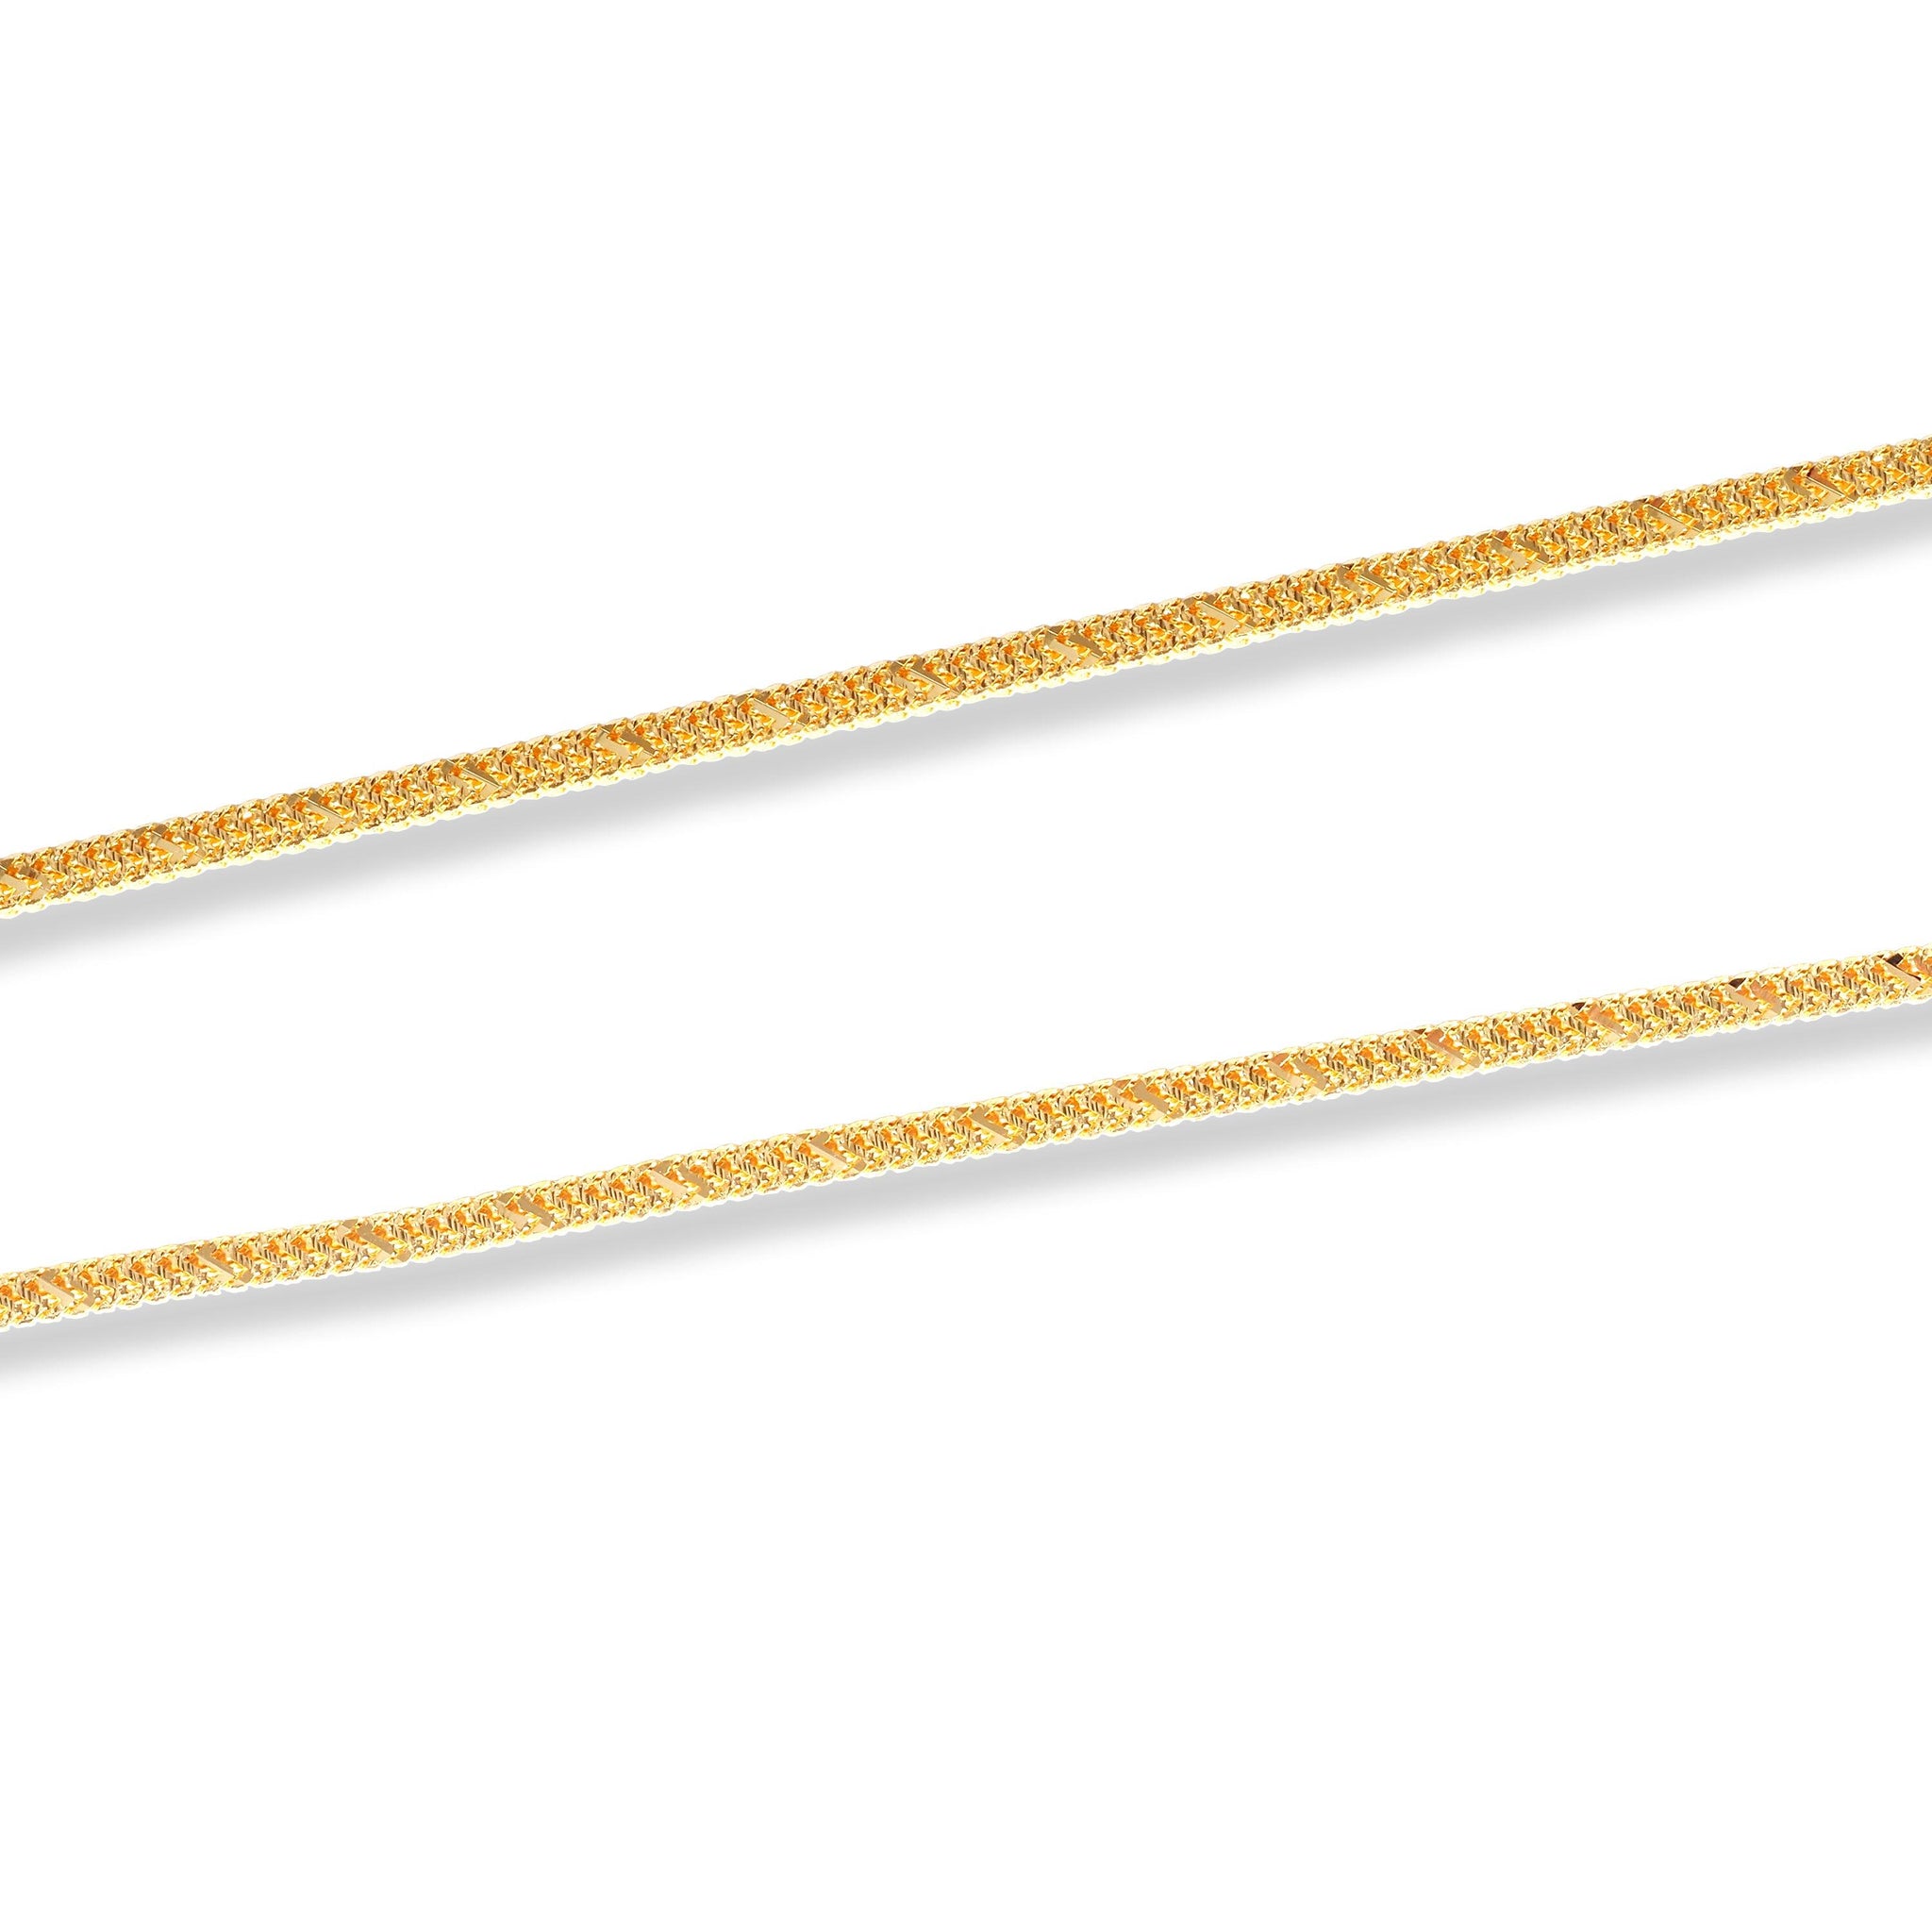 22ct Gold Square Foxtail Chain with Lobster Clasp C-7135